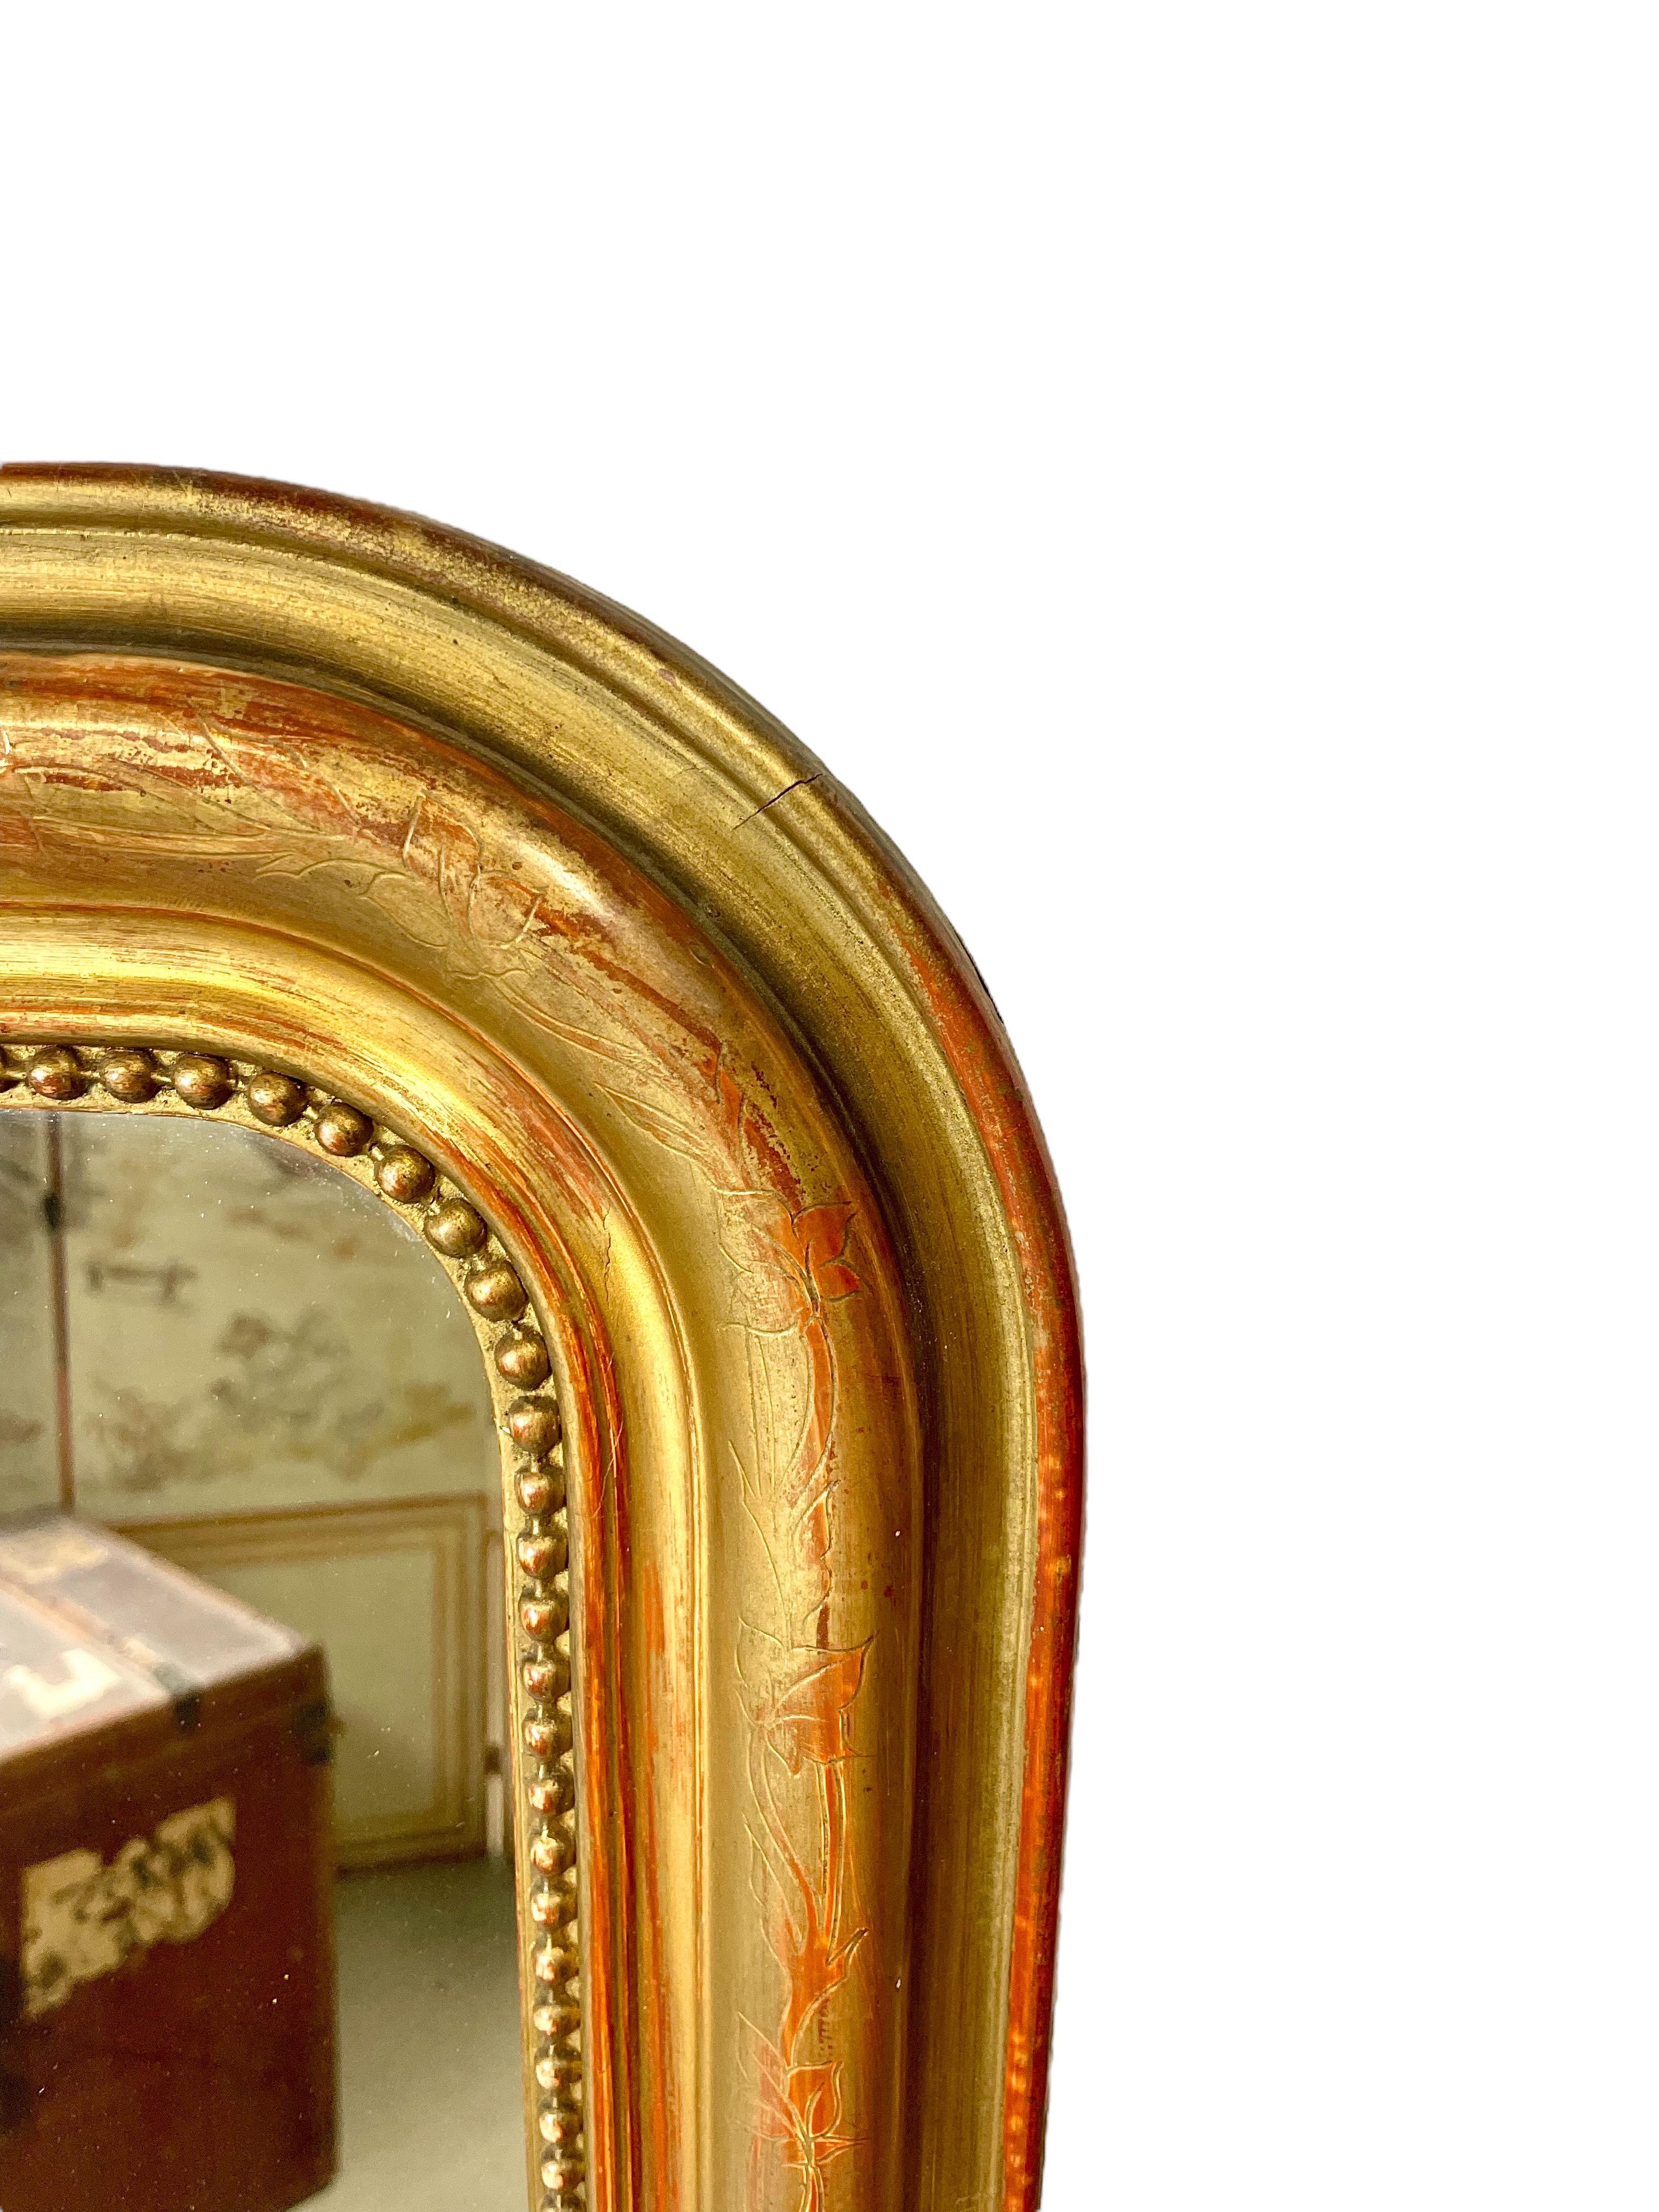 A charming Louis Philippe period gilt wood overmantle mirror, its burnished frame intricately etched with an intertwining design of ivy leaves and its inner rim edged with a classic 'string of pearls' motif. 
The original gilt finish of the frame is